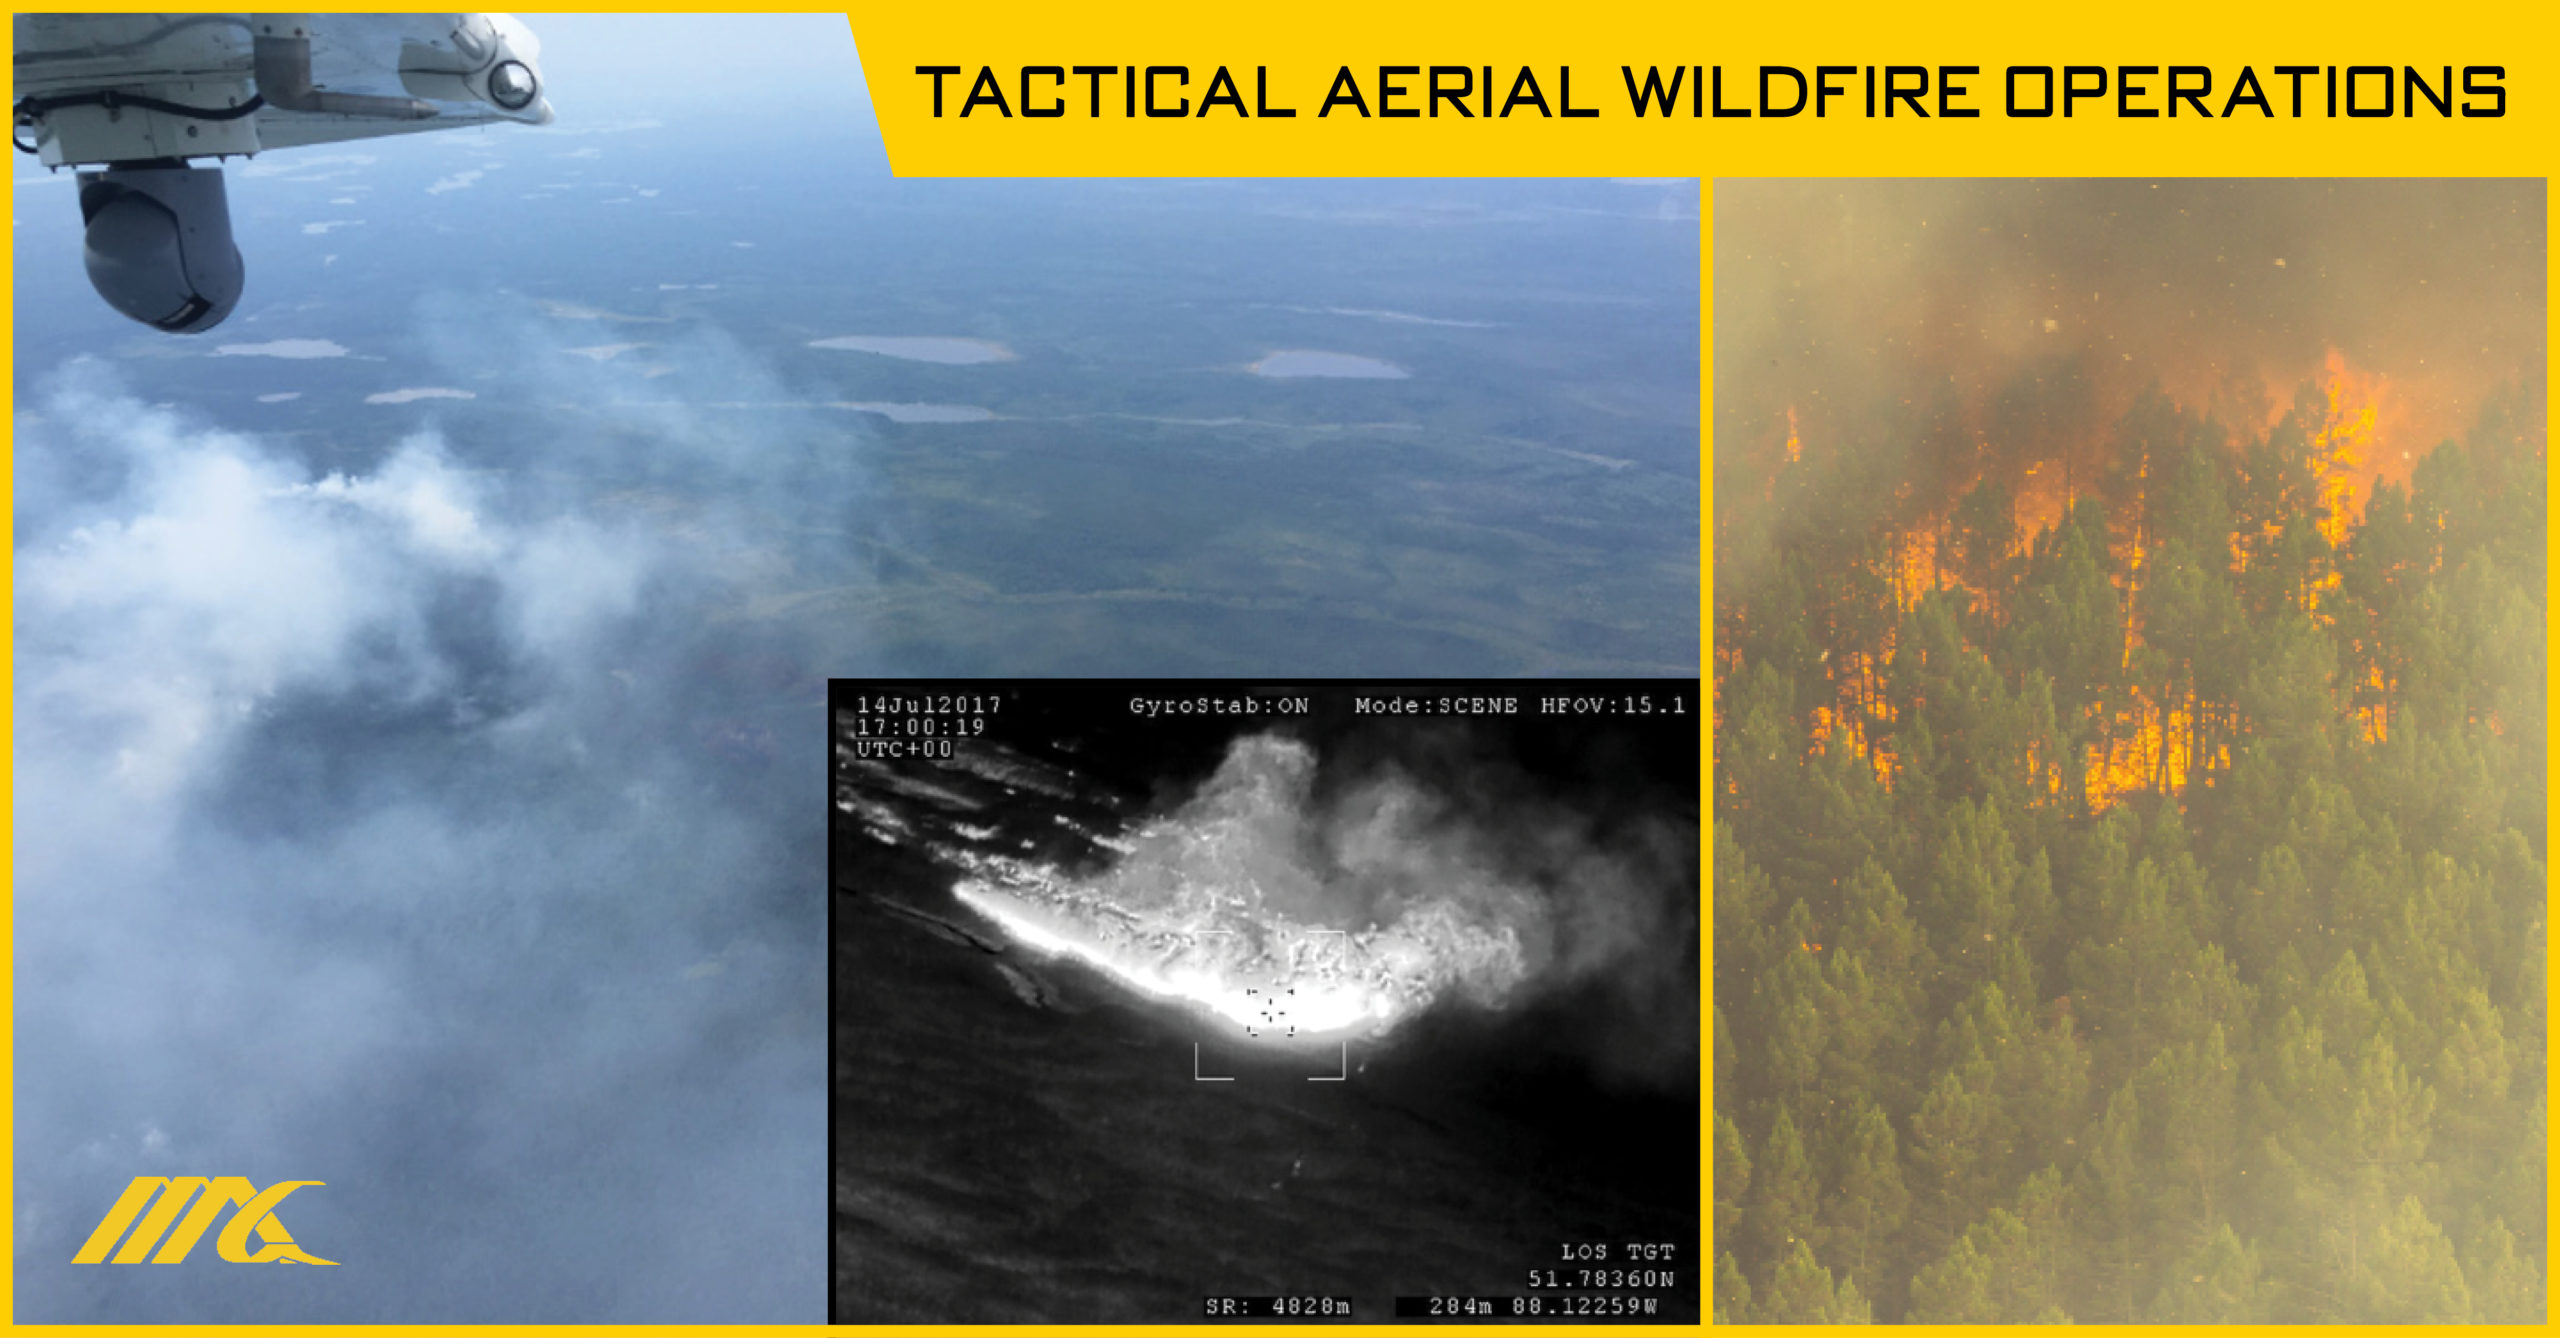 Tactical aerial firefighting operations